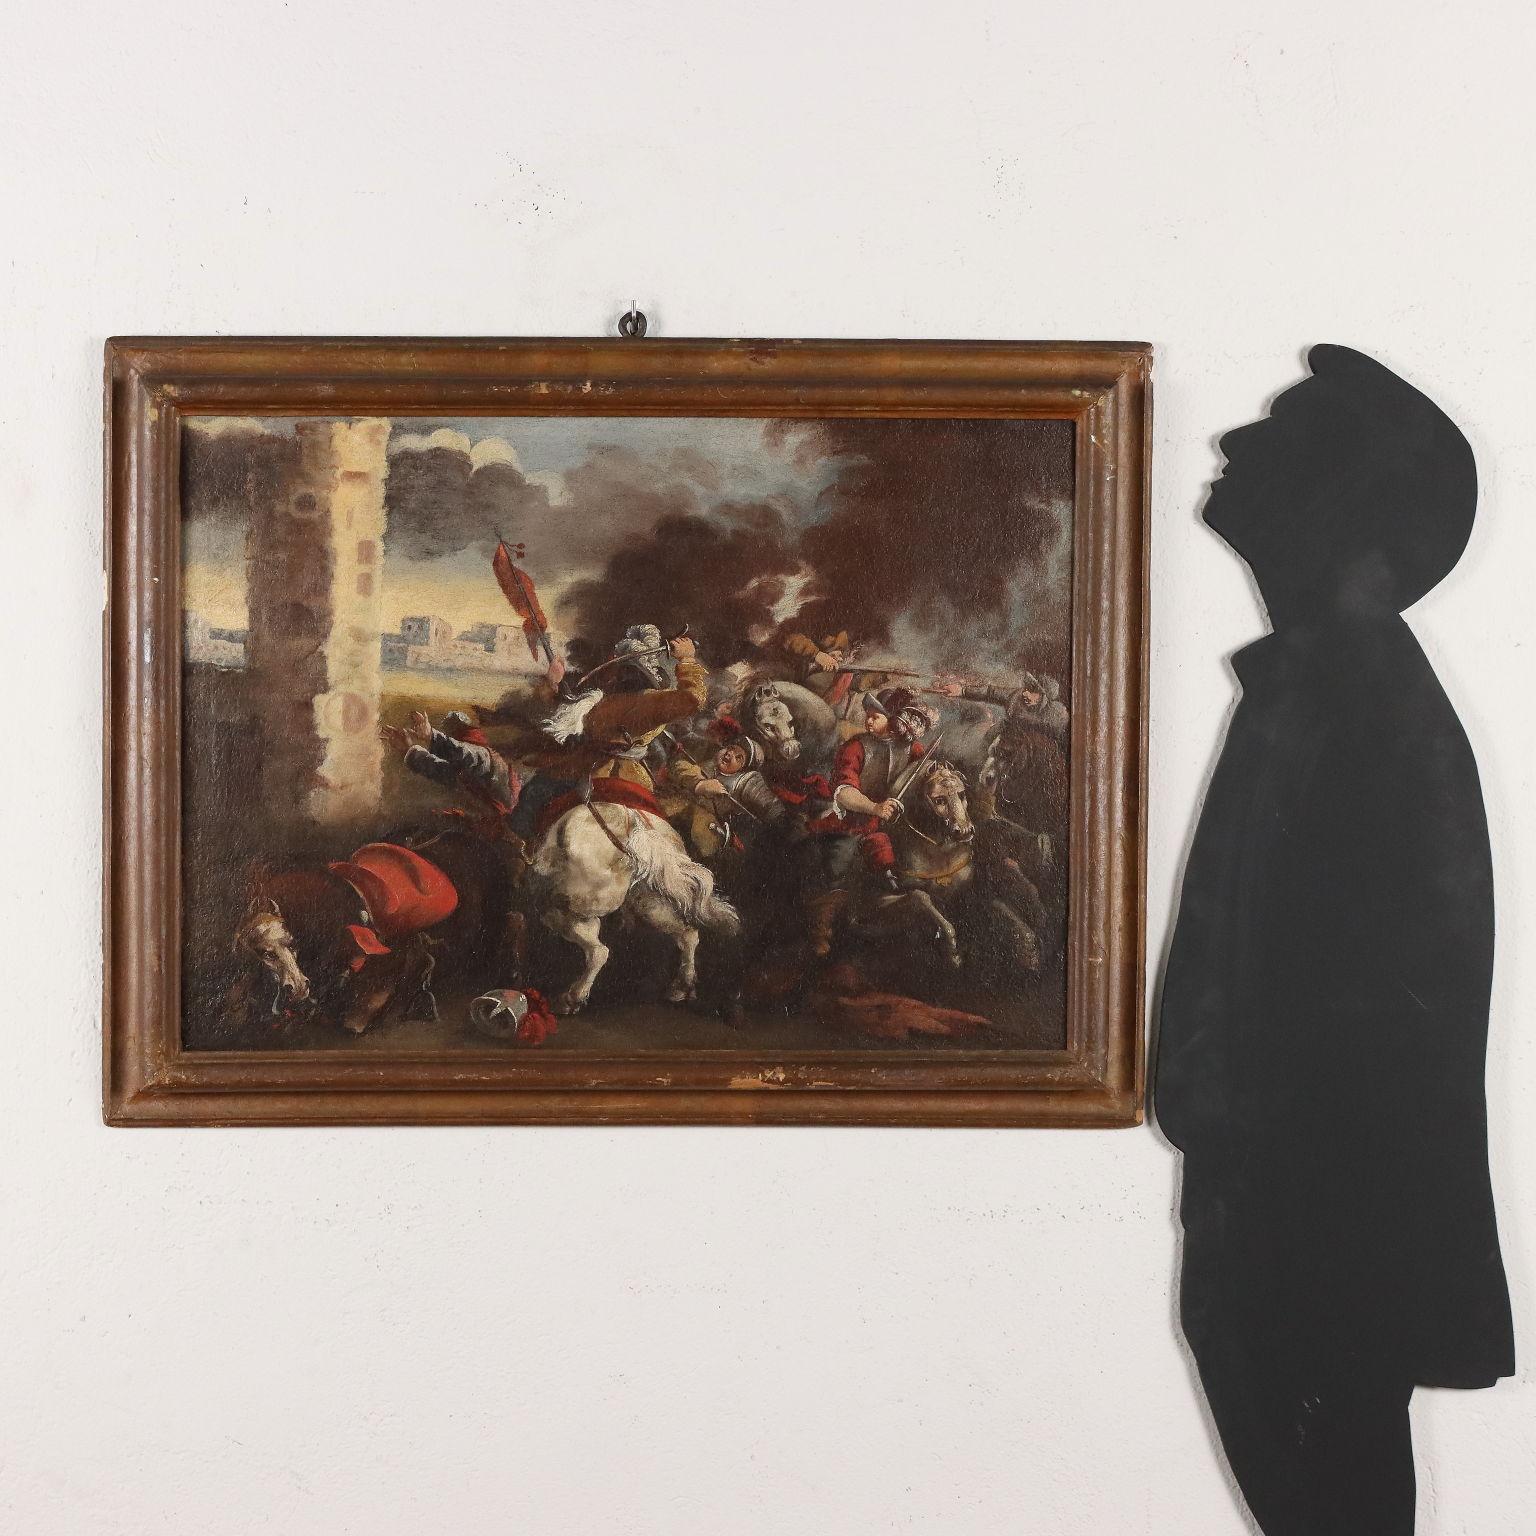 Oil on Canvas. Northern Italian school of the 17th-18th century. The scene features a clash of knights outside the walls of a besieged city, with smoke from firearms invading the sky. Restored and re-tinted, the painting is presented in adapted